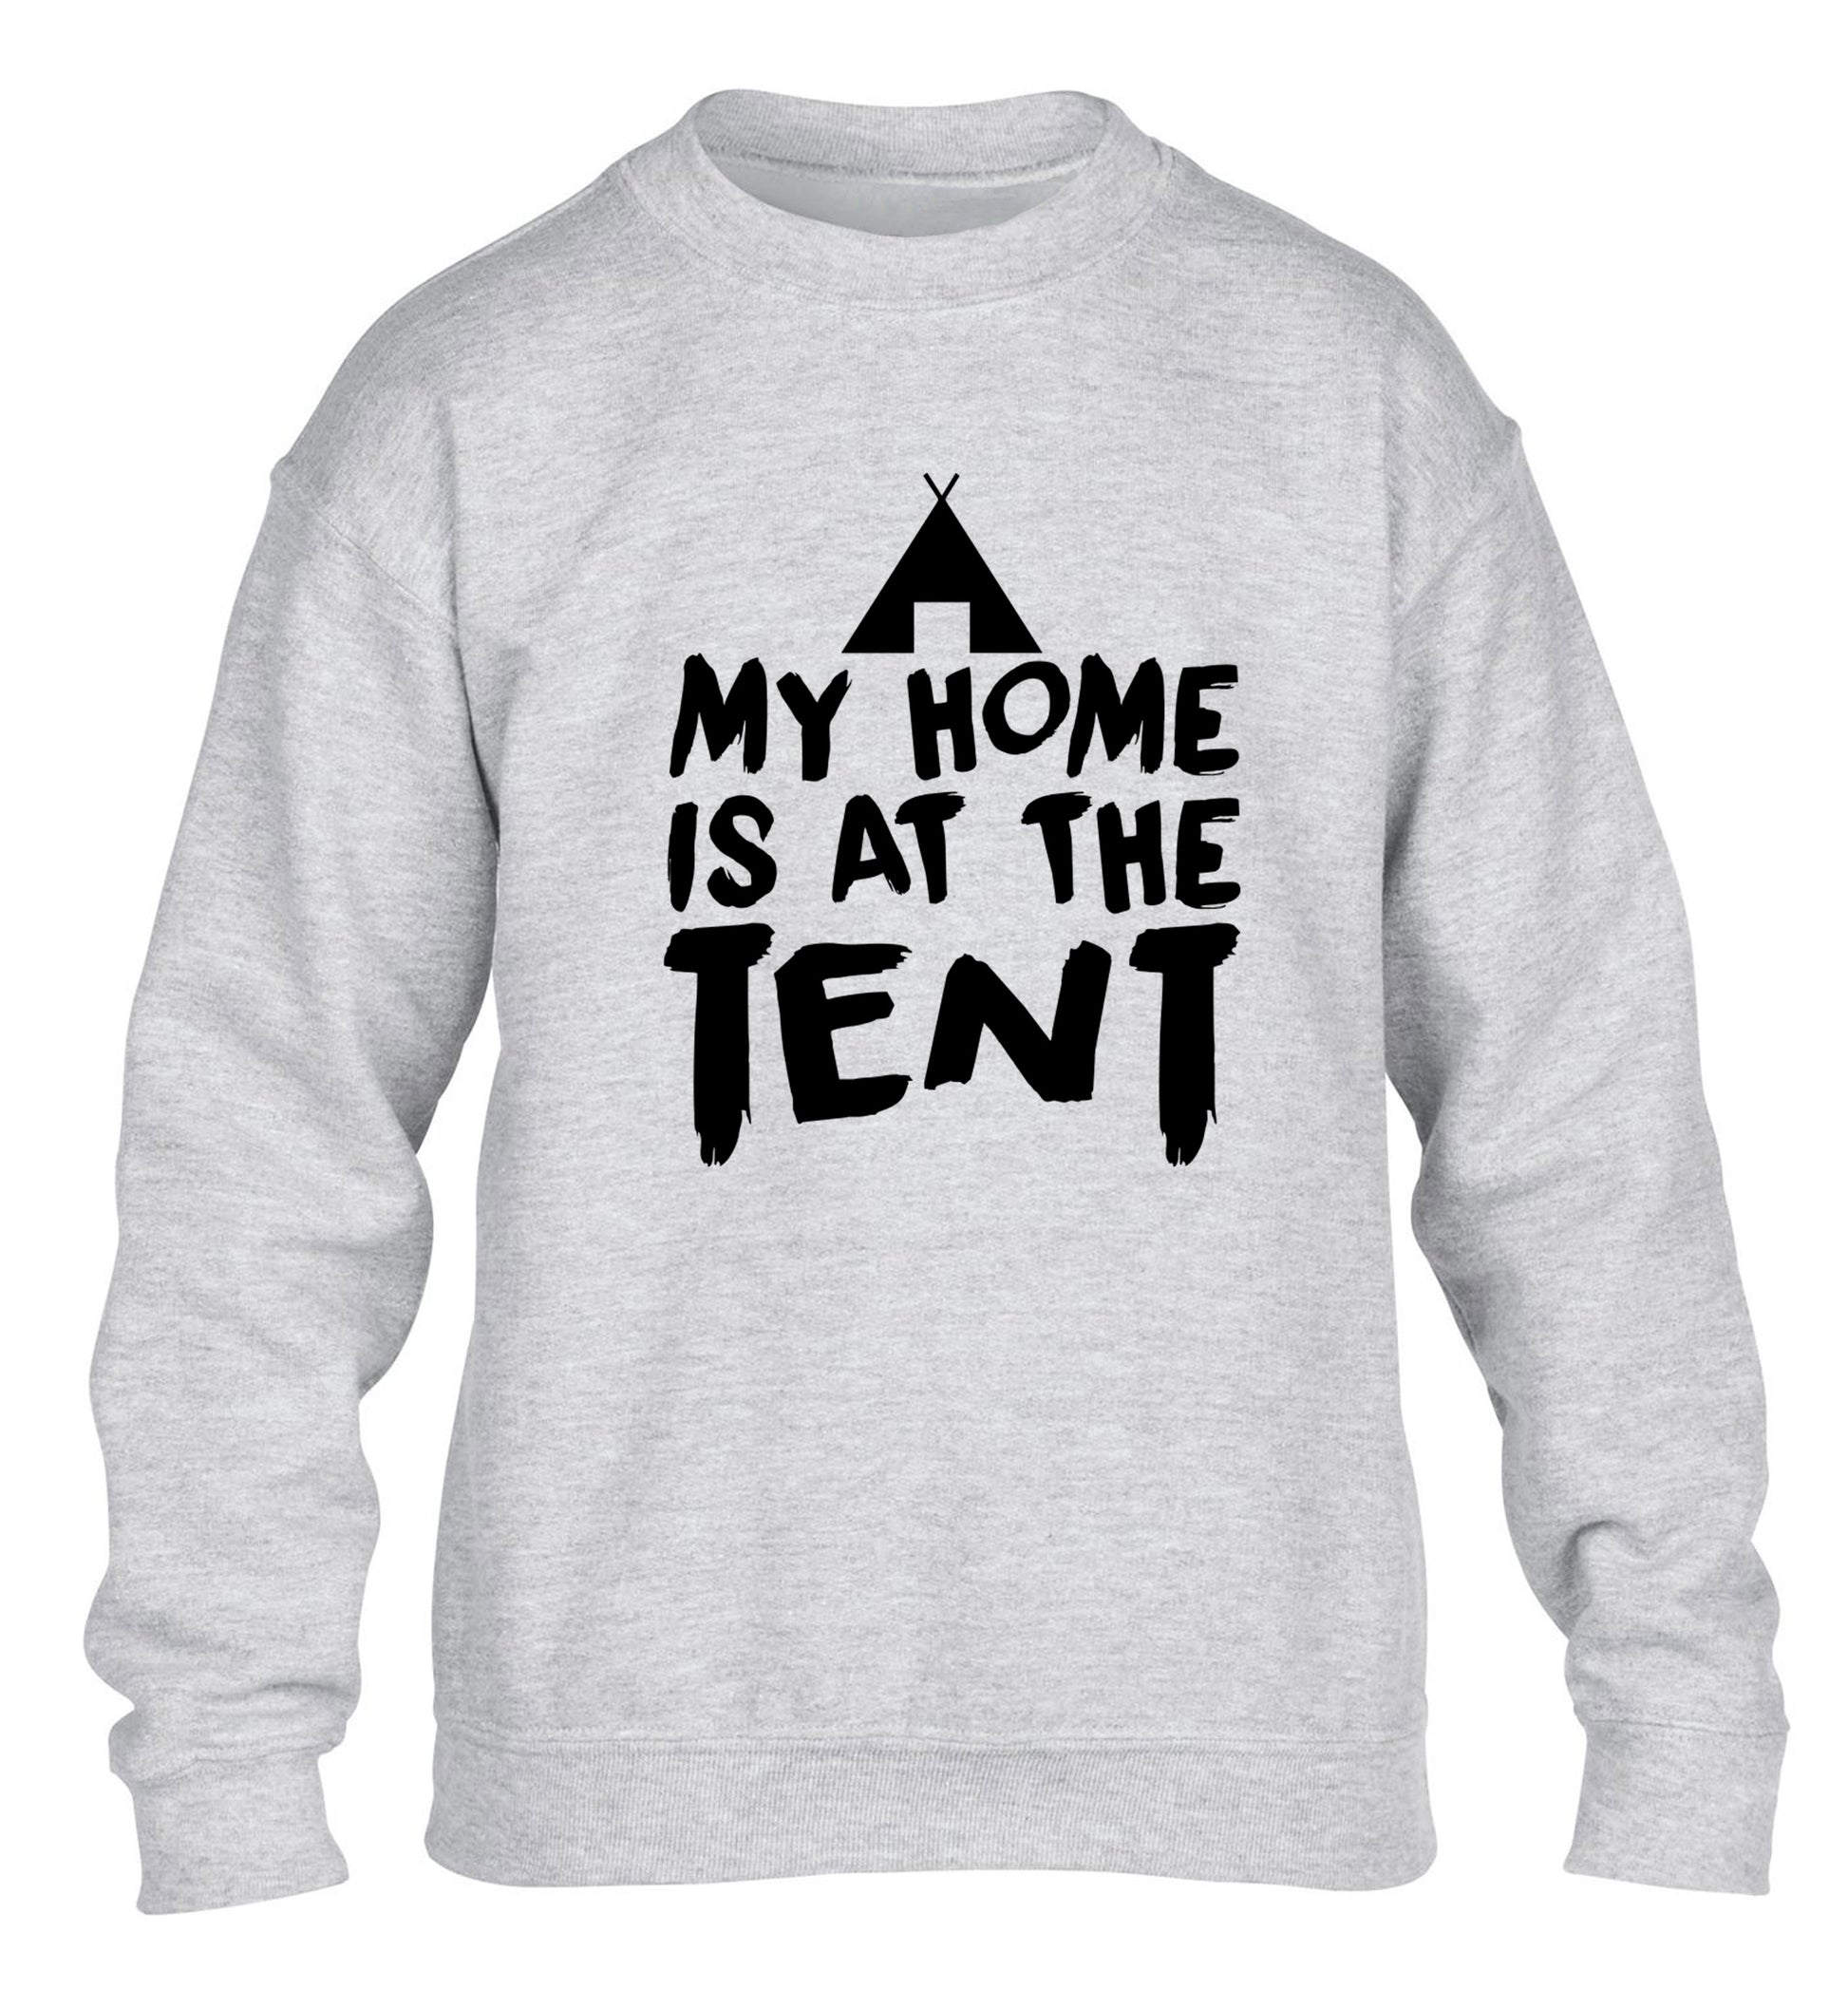 My home is at the tent children's grey sweater 12-14 Years